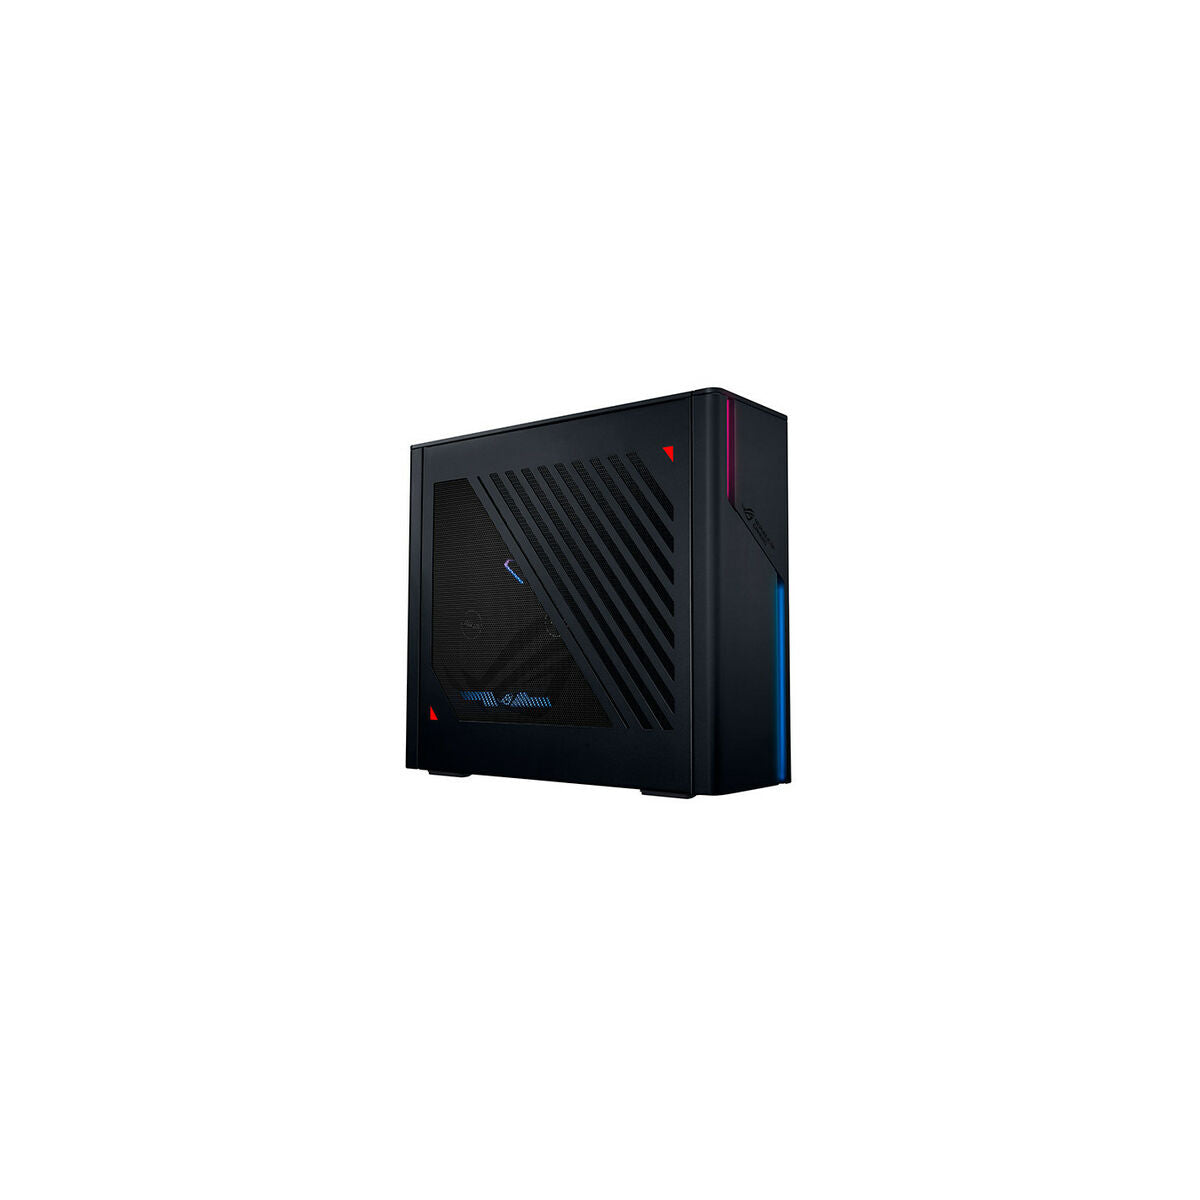 Desktop PC Asus G22CH-71470F0100 32 GB RAM 1 TB SSD, Asus, Computing, Desktops, desktop-pc-asus-g22ch-71470f0100-32-gb-ram-1-tb-ssd, Brand_Asus, category-reference-2609, category-reference-2791, category-reference-2792, category-reference-t-19685, category-reference-t-19903, category-reference-t-21381, computers / components, Condition_NEW, office, Price_+ 1000, Teleworking, RiotNook